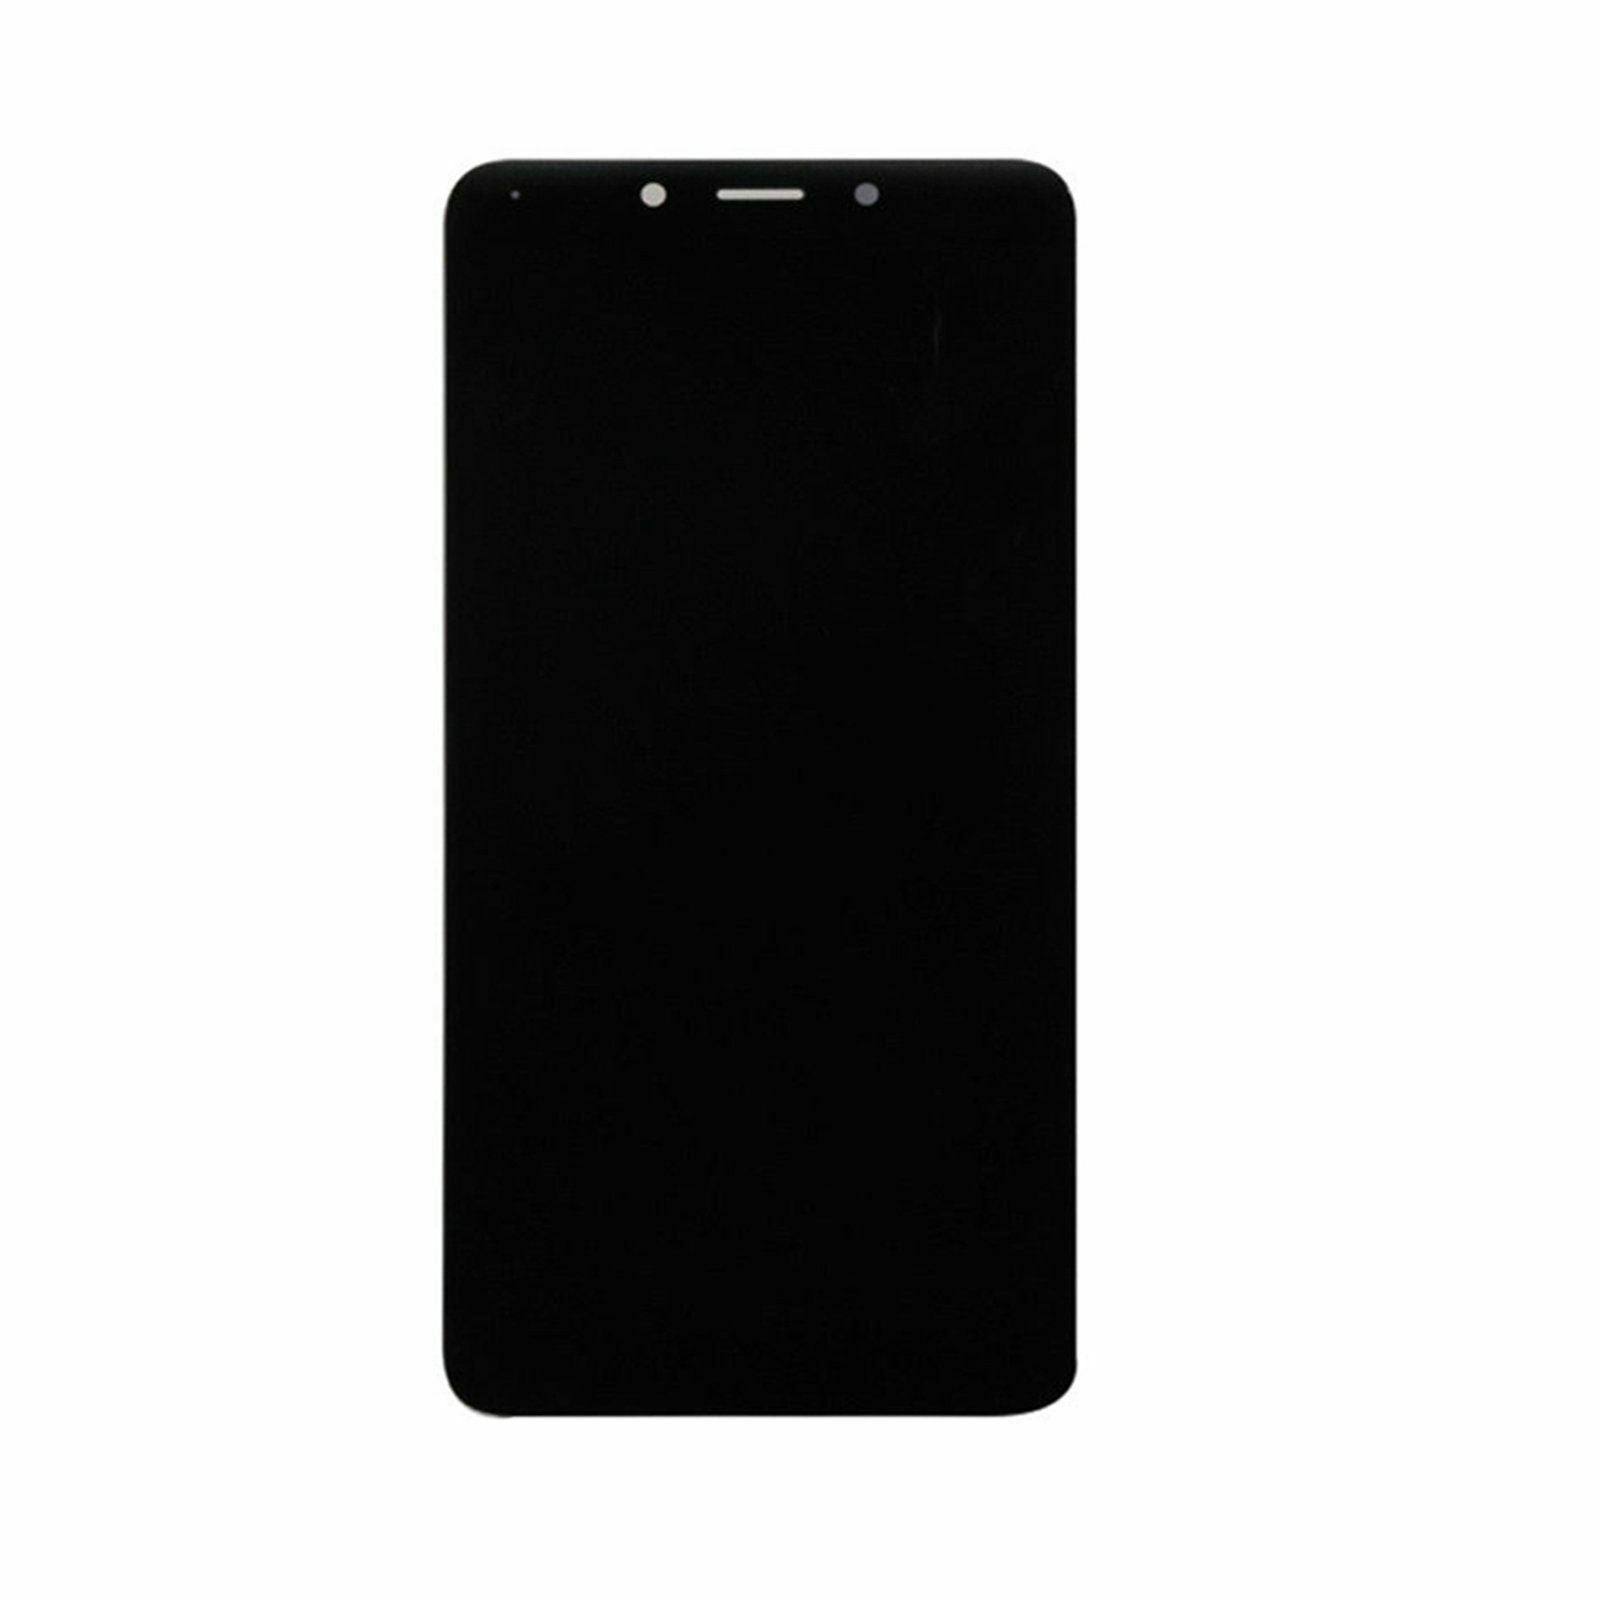 Xiaomi Redmi 6 6A LCD Display Touch Screen Assembly Black for [product_price] - First Help Tech